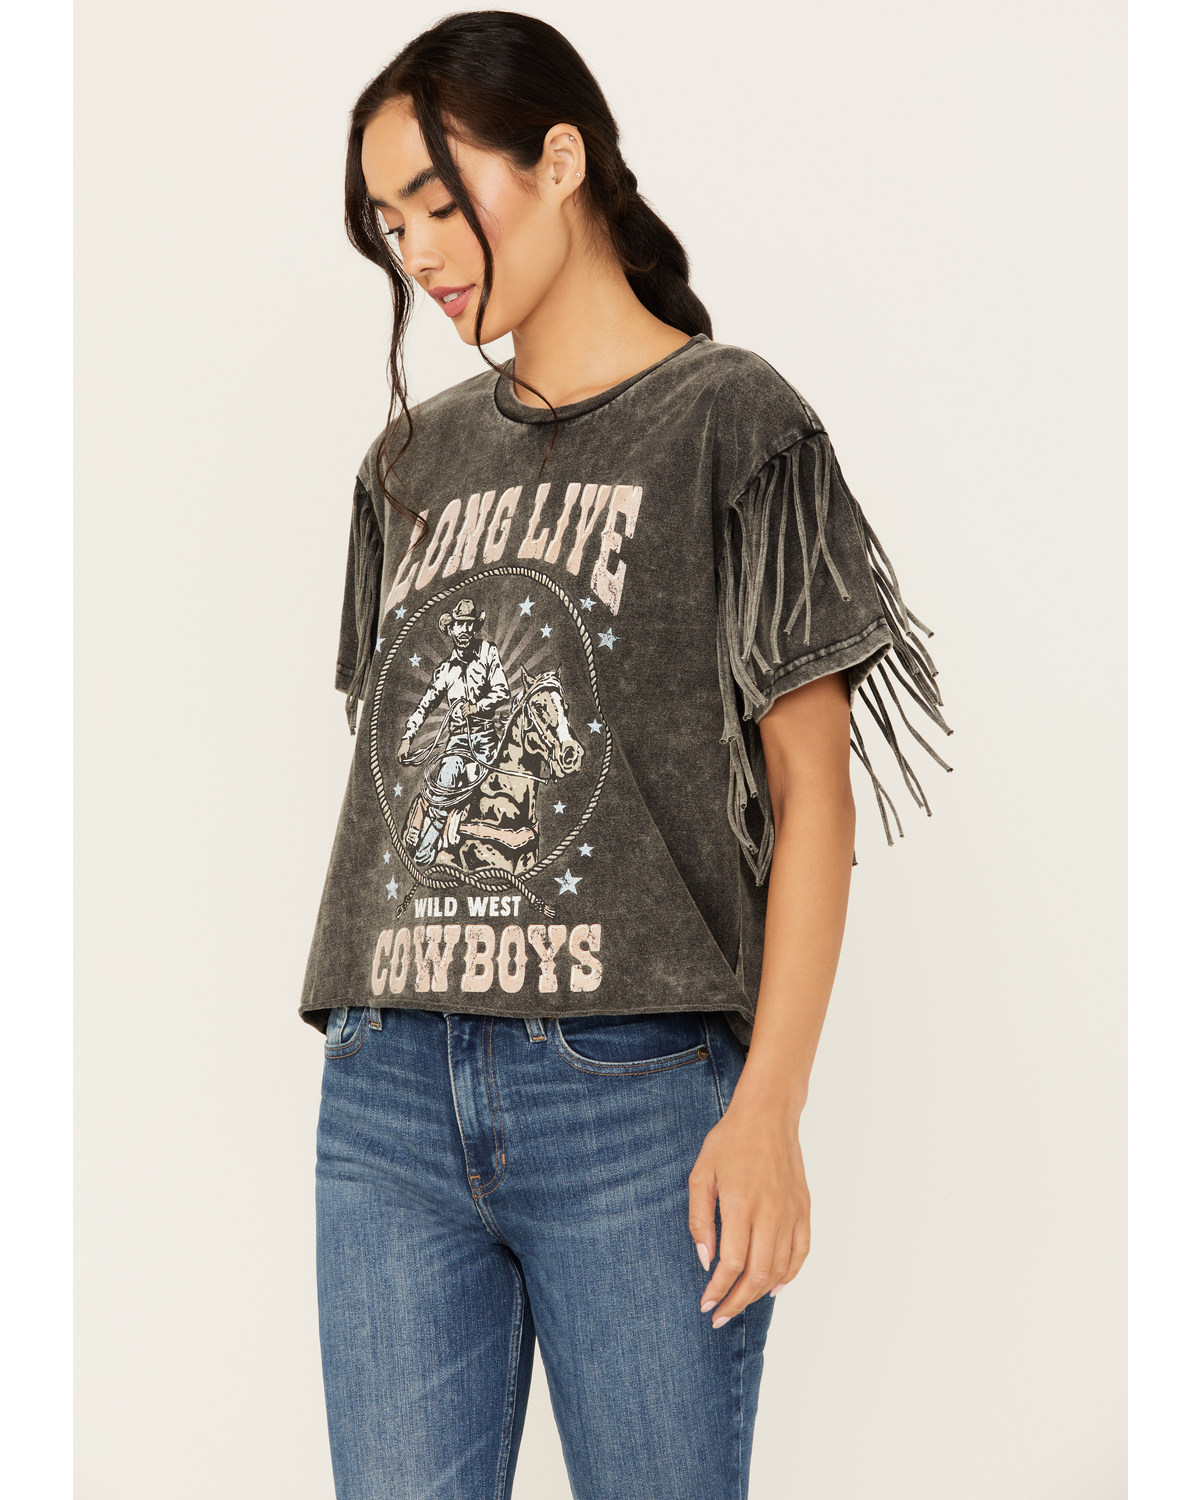 Youth Revolt Women's Fringe Long Live Cowboys Graphic Tee